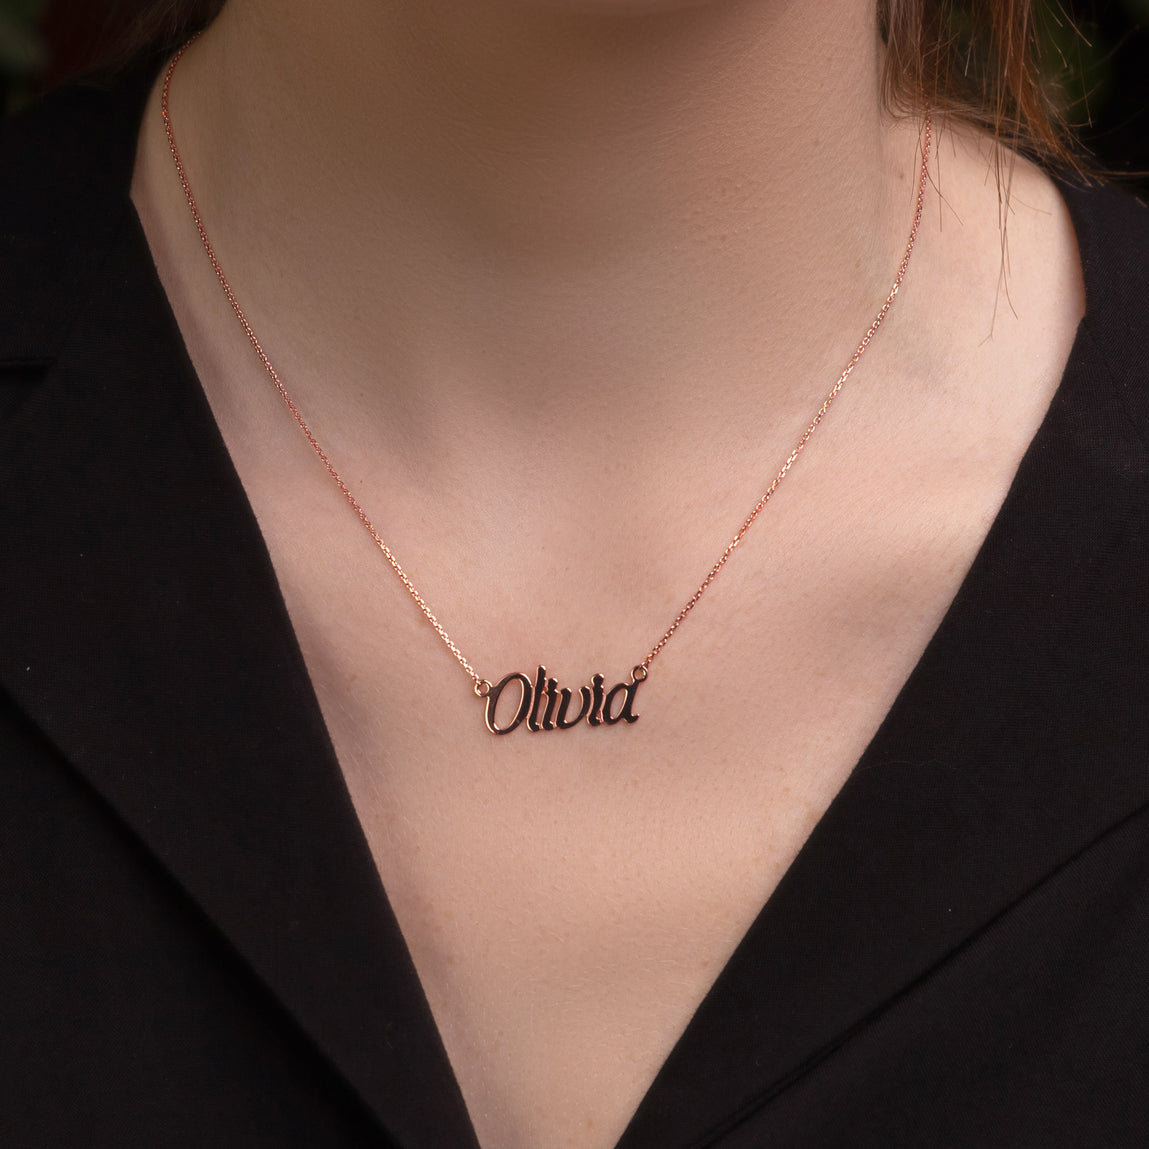 Gold Name Necklace Aurora Segal Jewelry